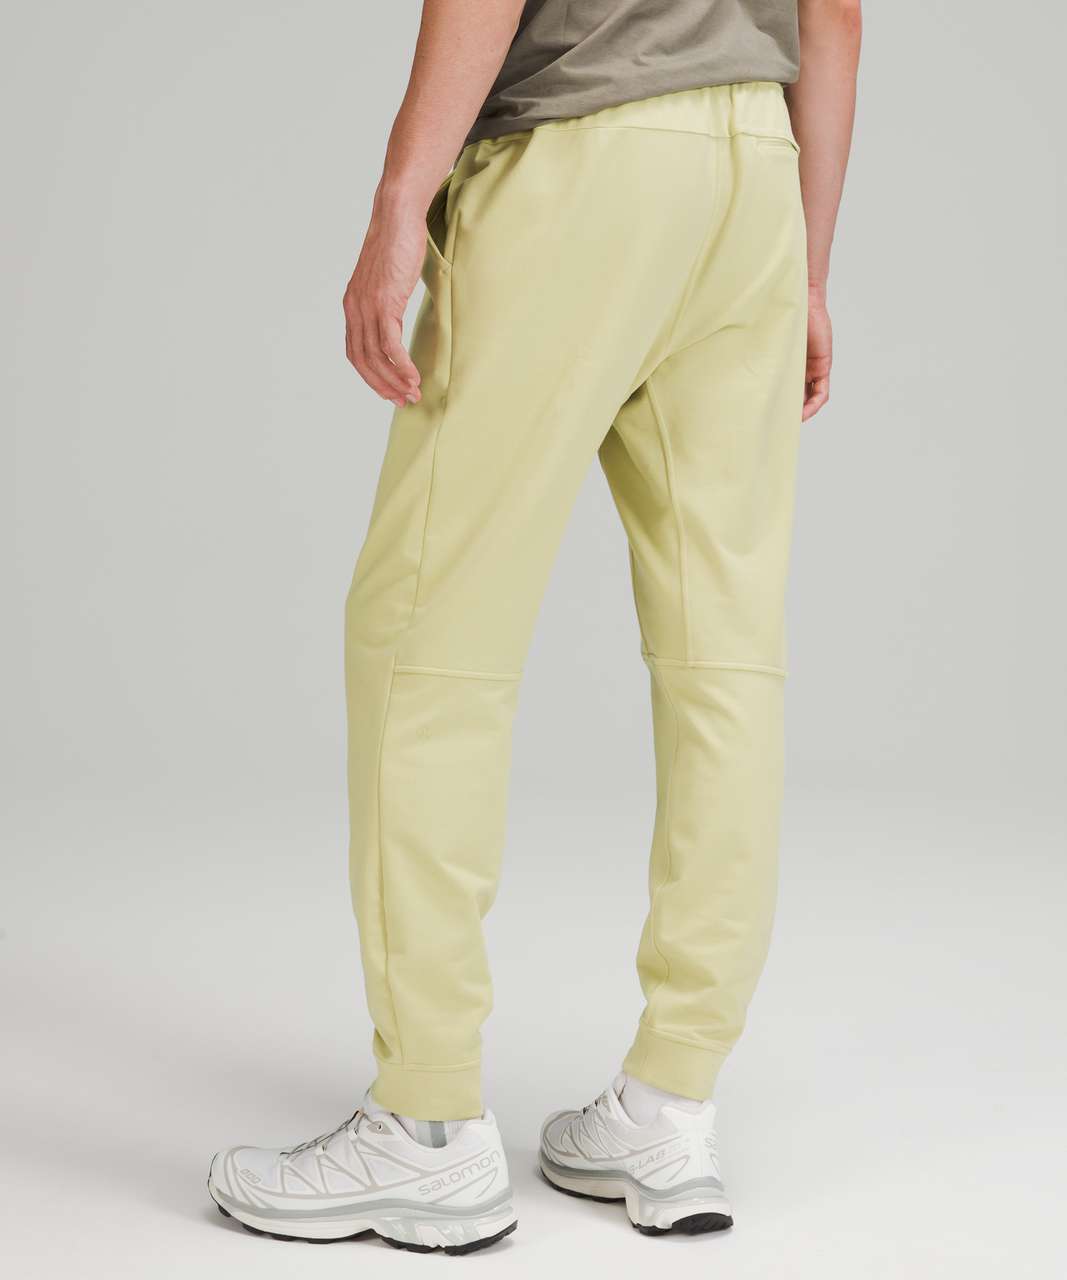 Lululemon City Sweat Jogger 29" *French Terry - Dew Green